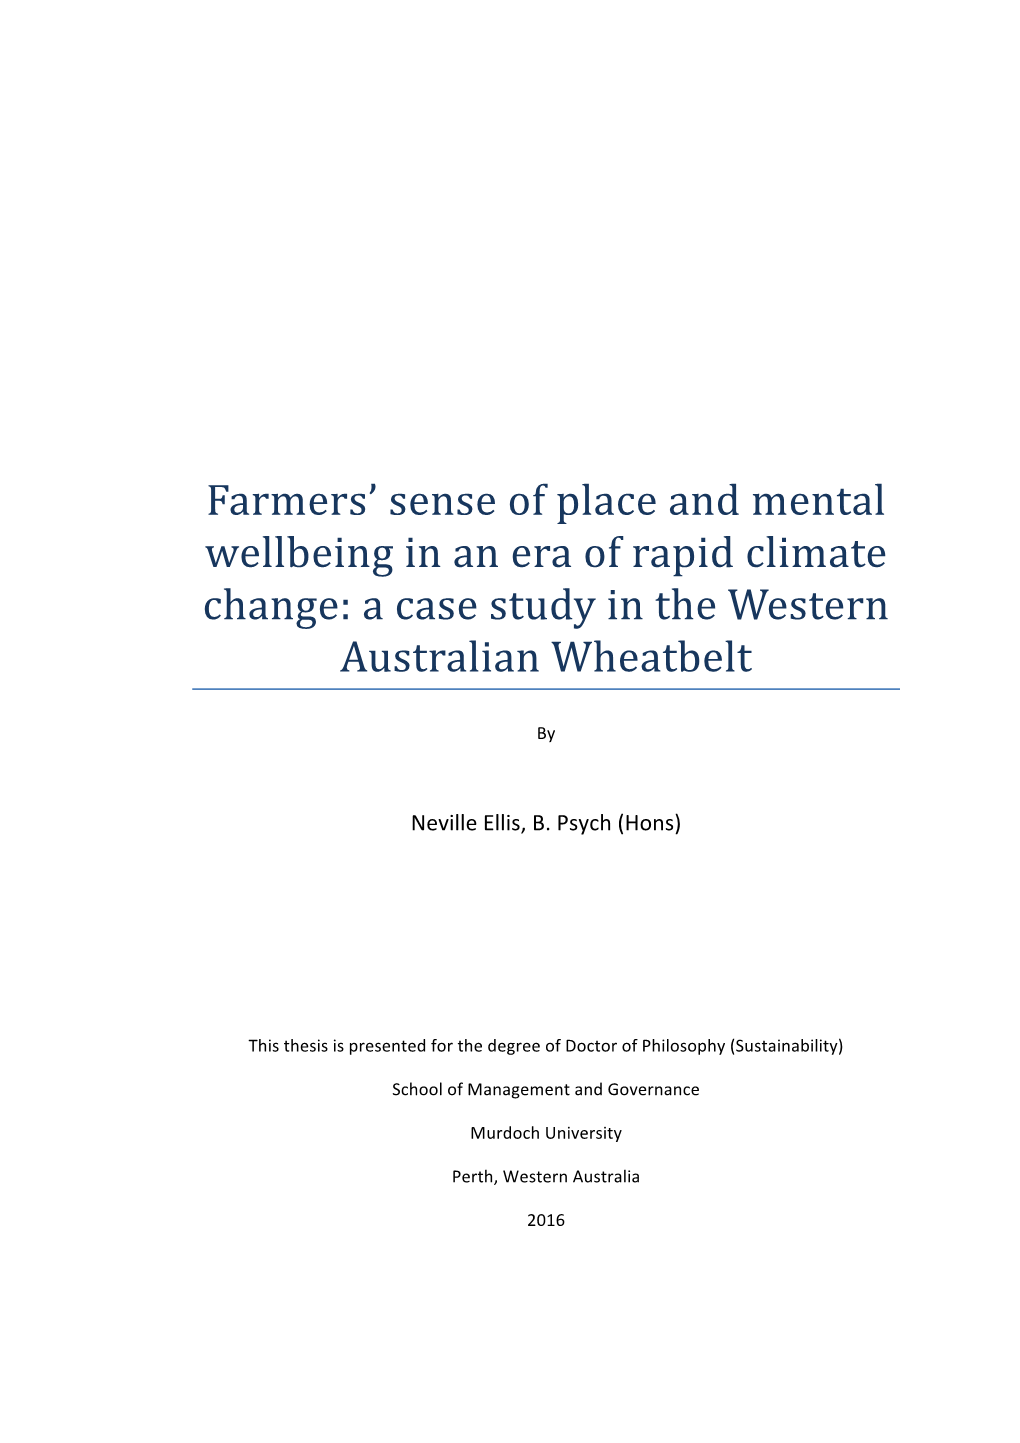 Farmers' Sense of Place and Mental Wellbeing in an Era of Rapid Climate